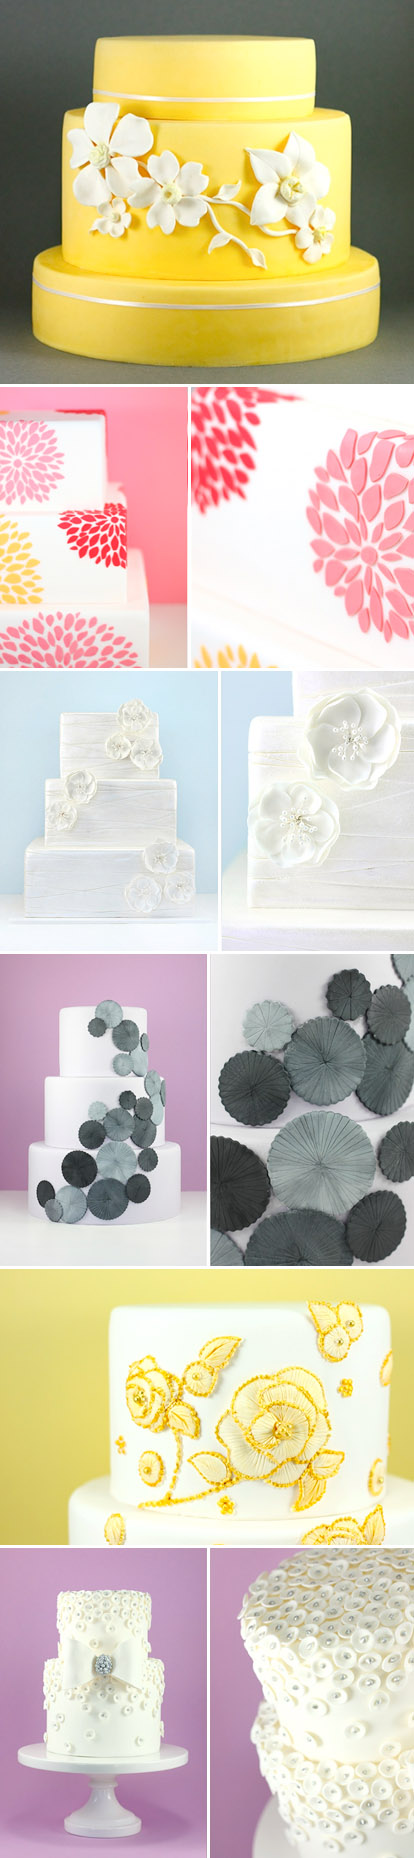 Beautiful, modern fondant wedding cakes, pretty floral cake designs from Eat Cake Be Merry